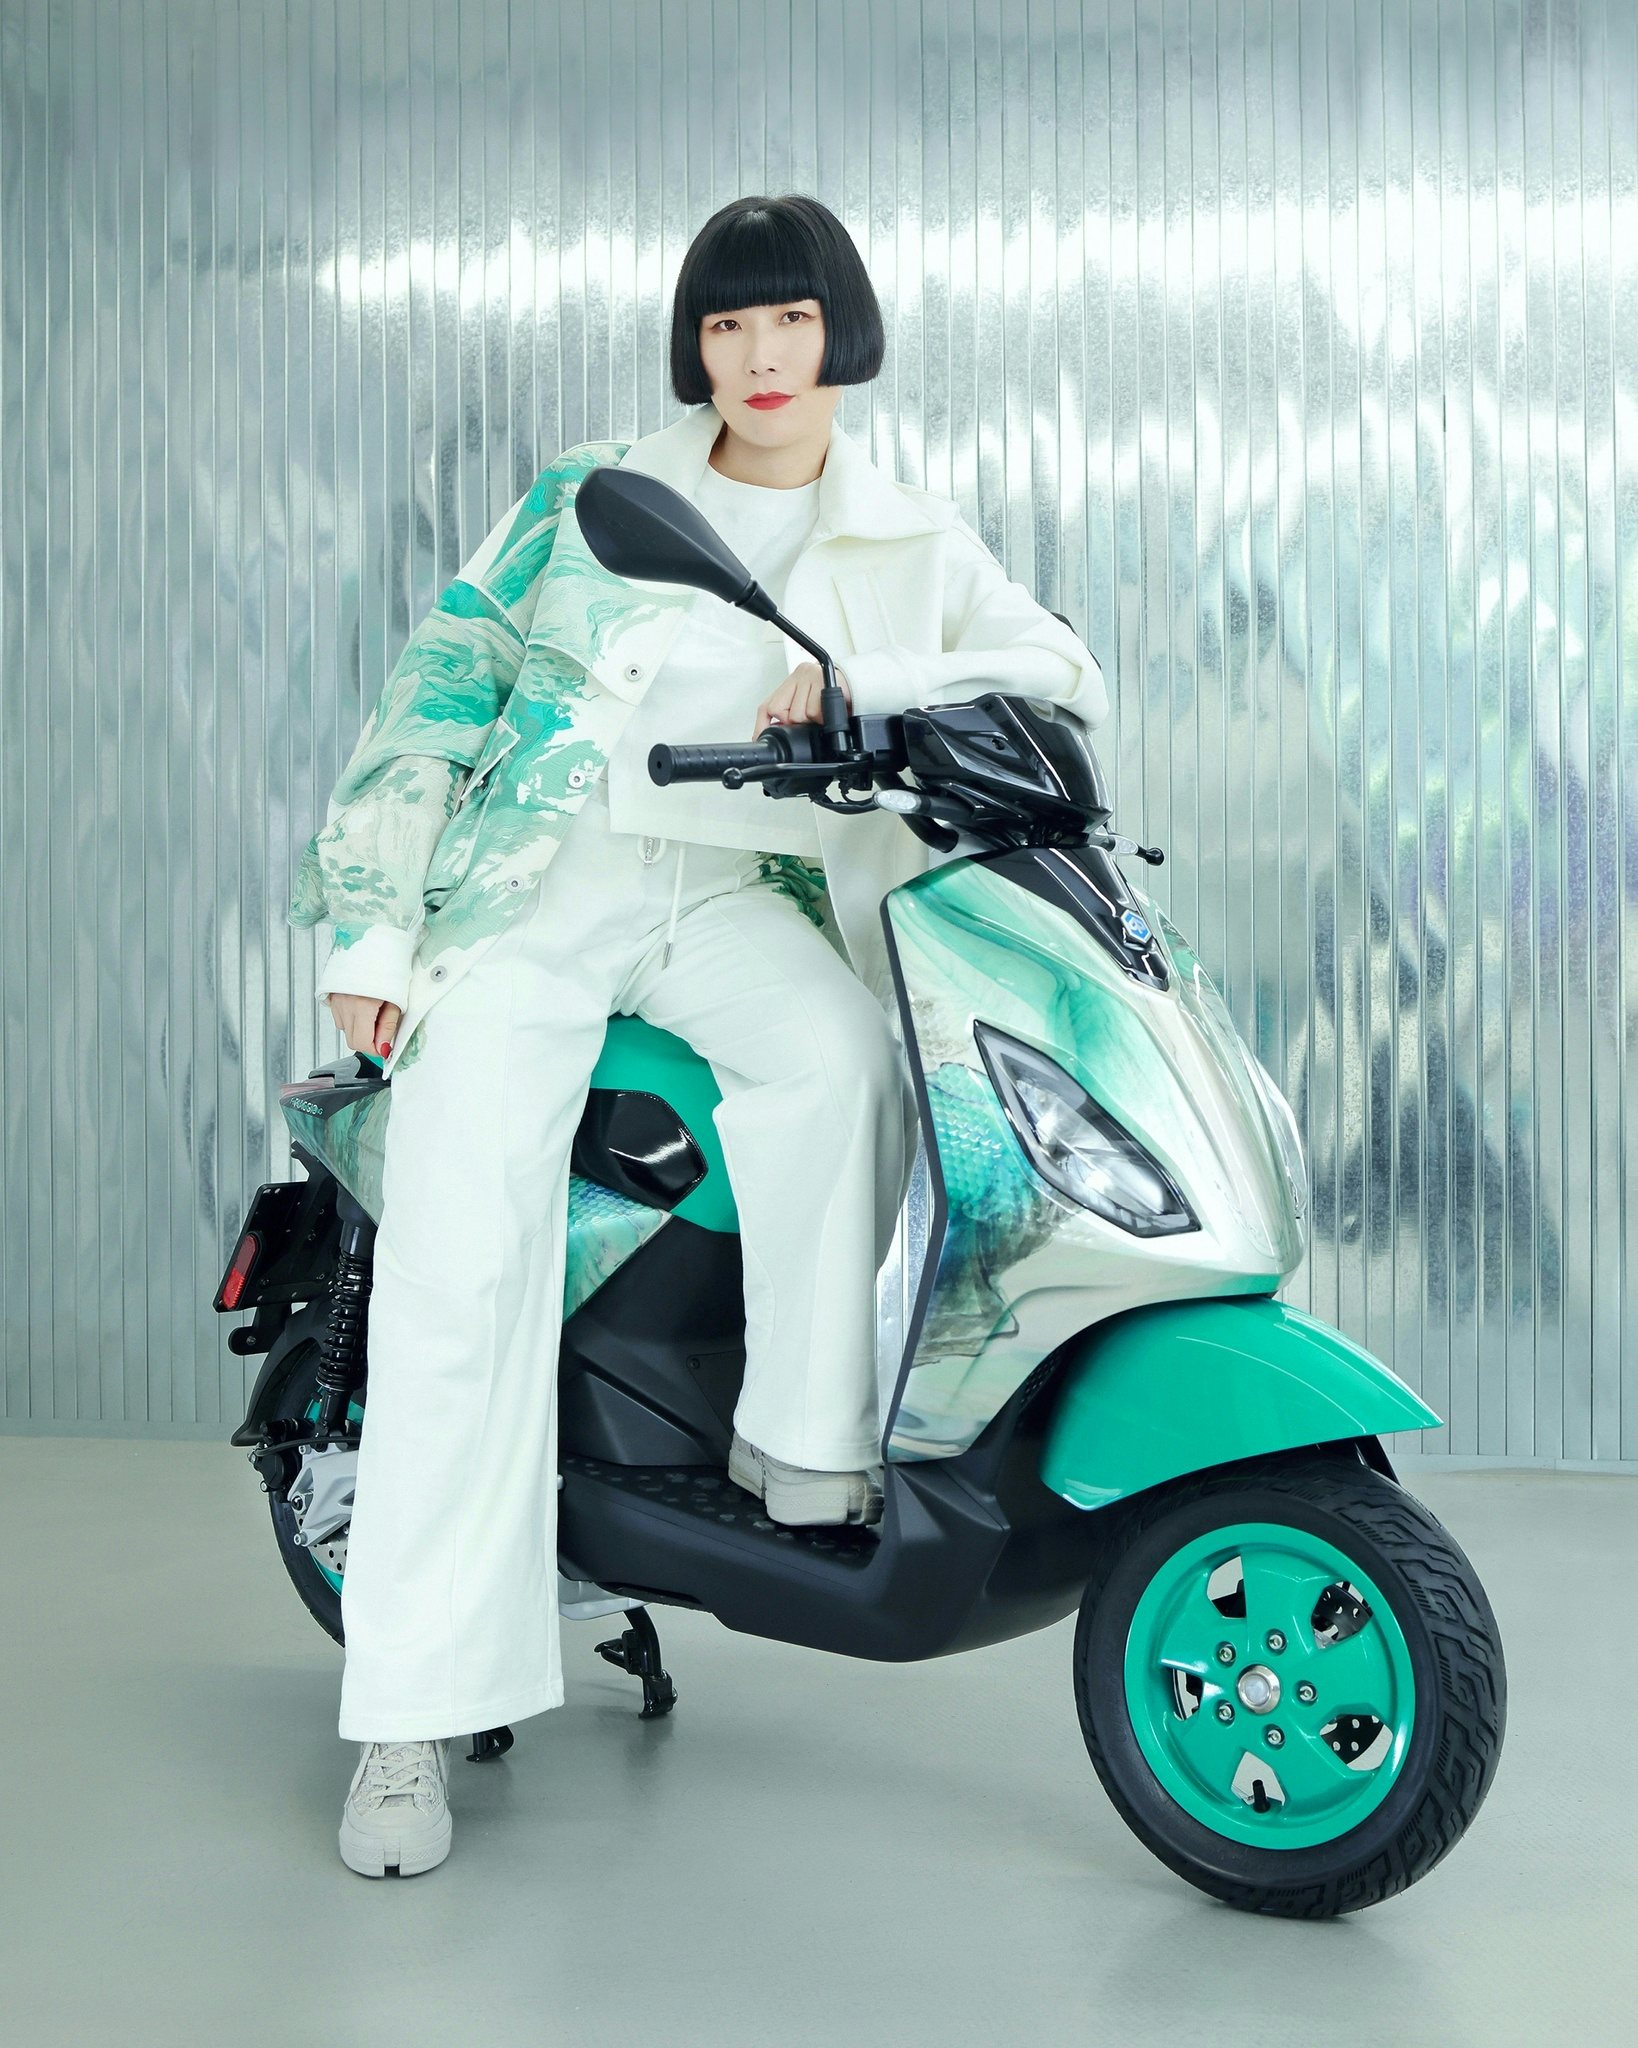 Chinese designer Feng Chen Wang worked on Piaggio's first e-scooter in Spring 2022. Photo: Piaggio